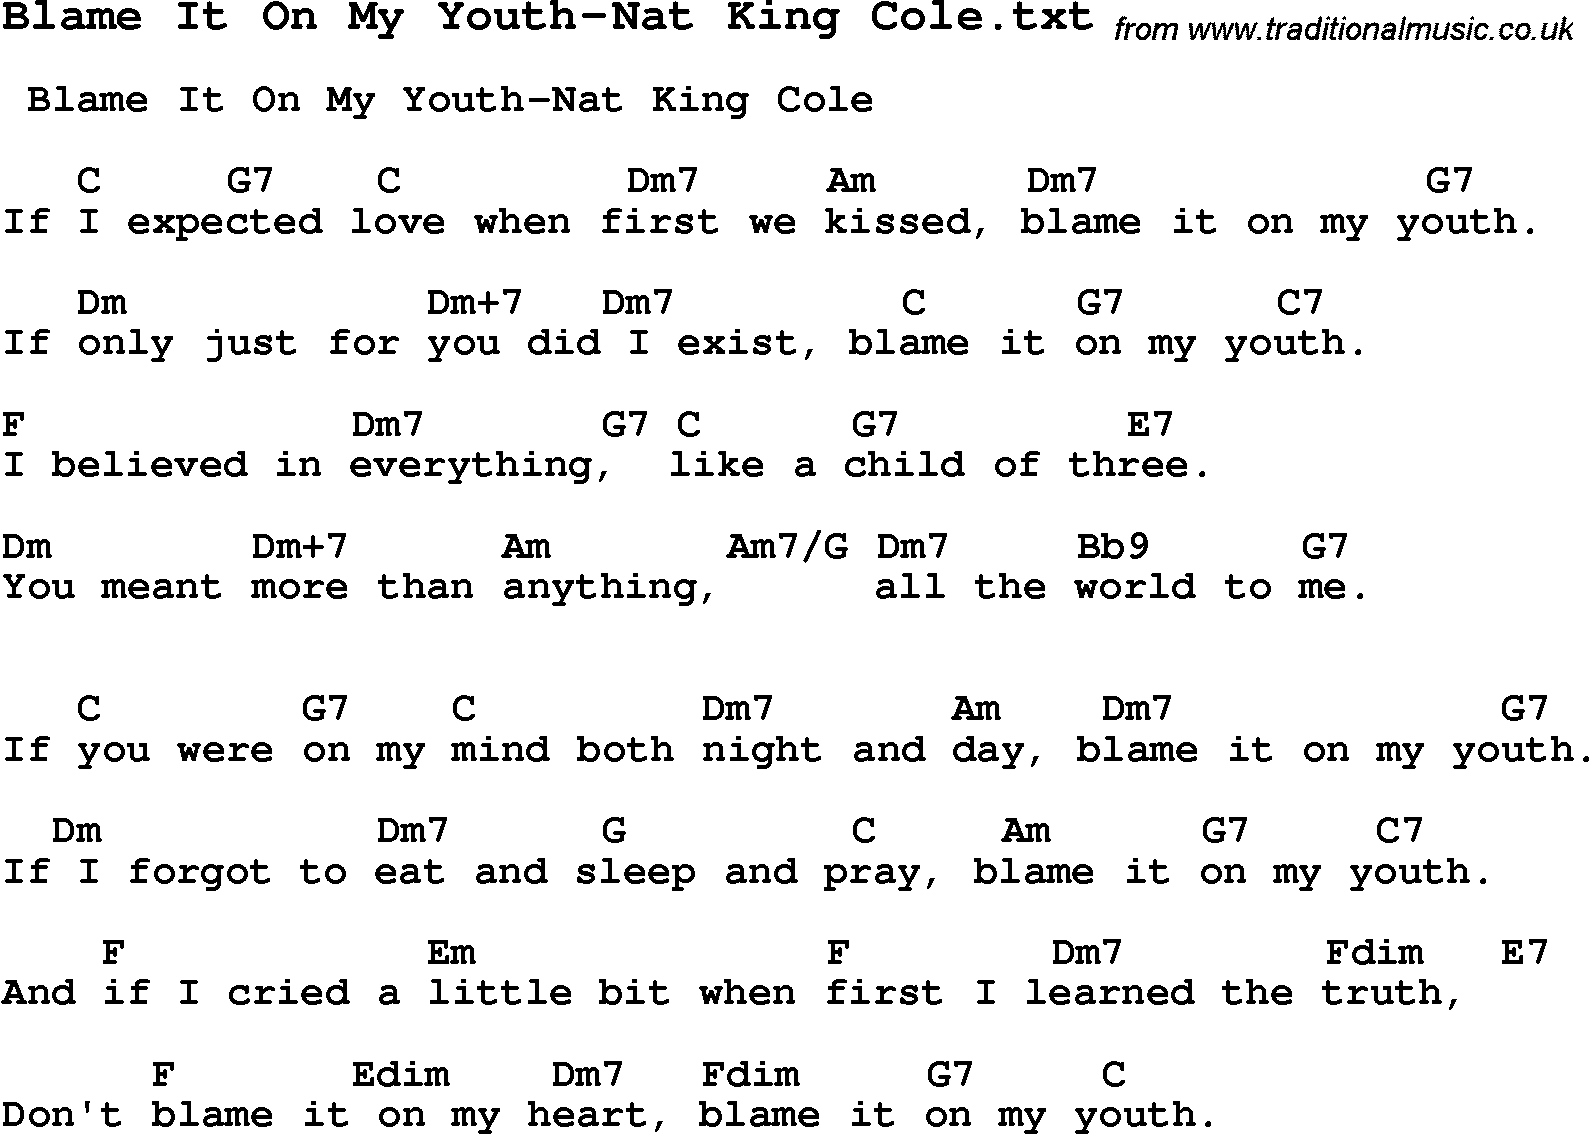 Jazz Song from top bands and vocal artists with chords, tabs and lyrics - Blame It On My Youth-Nat King Cole